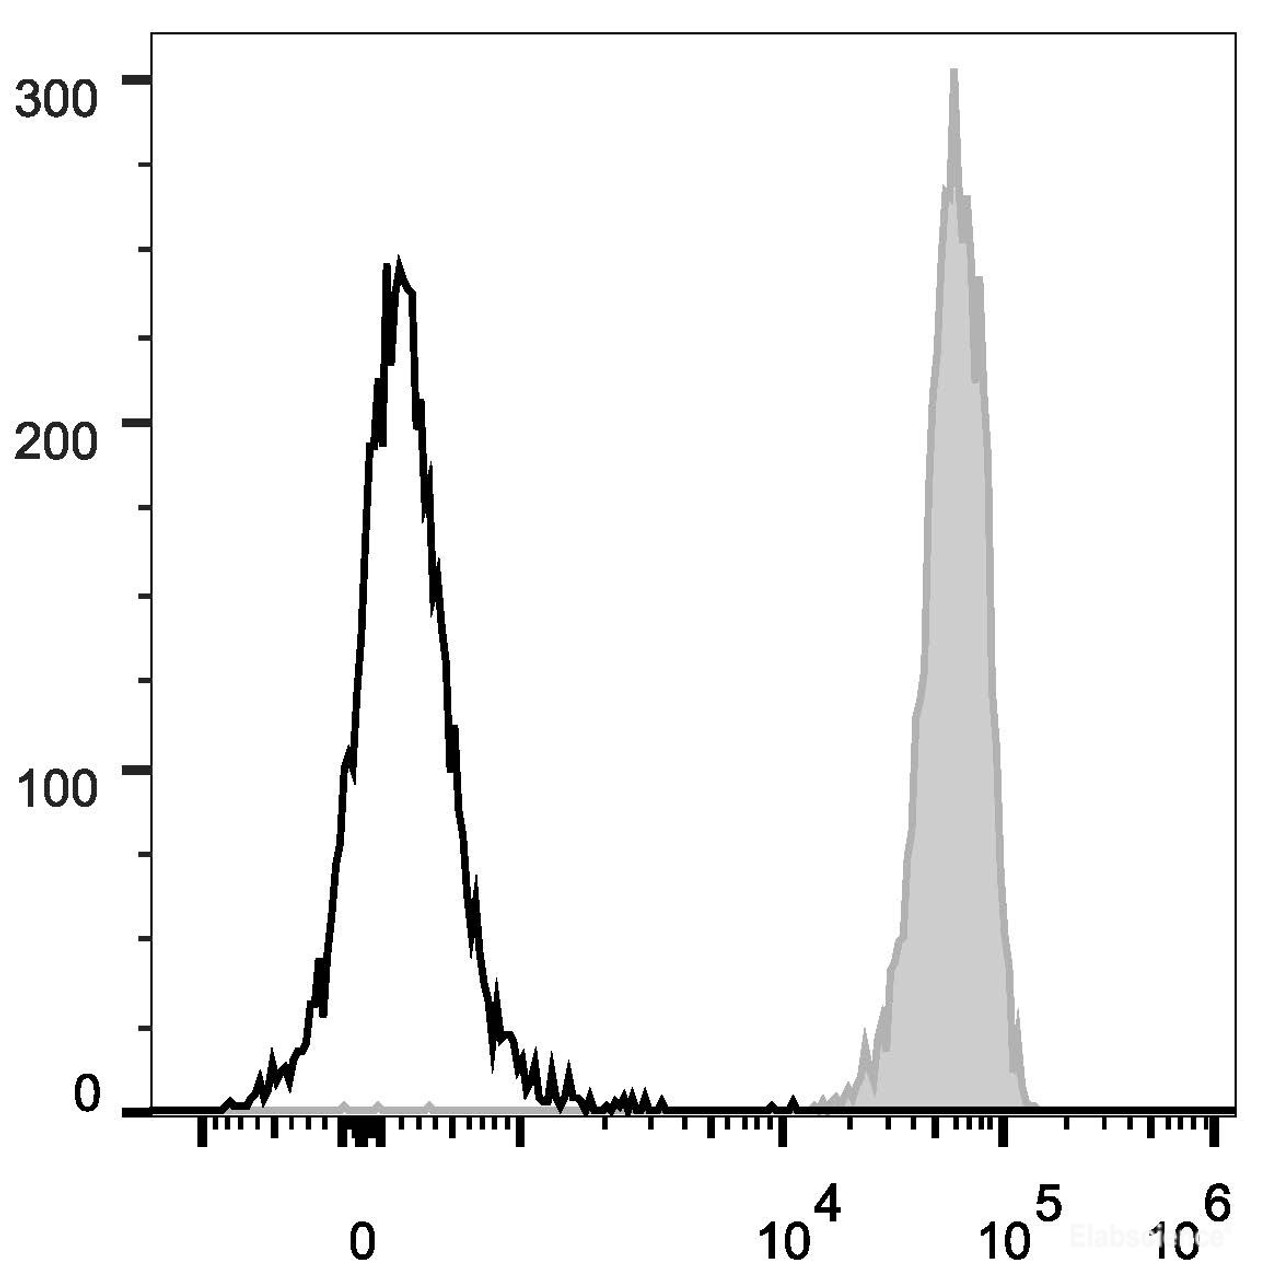 C57BL/6 murine splenocytes are stained with PerCP/Cyanine5.5 Anti-Mouse CD45 Antibody[Used at .2 μg/1<sup>6</sup> cells dilution](filled gray histogram). Unstained splenocytes (empty black histogram) are used as control.